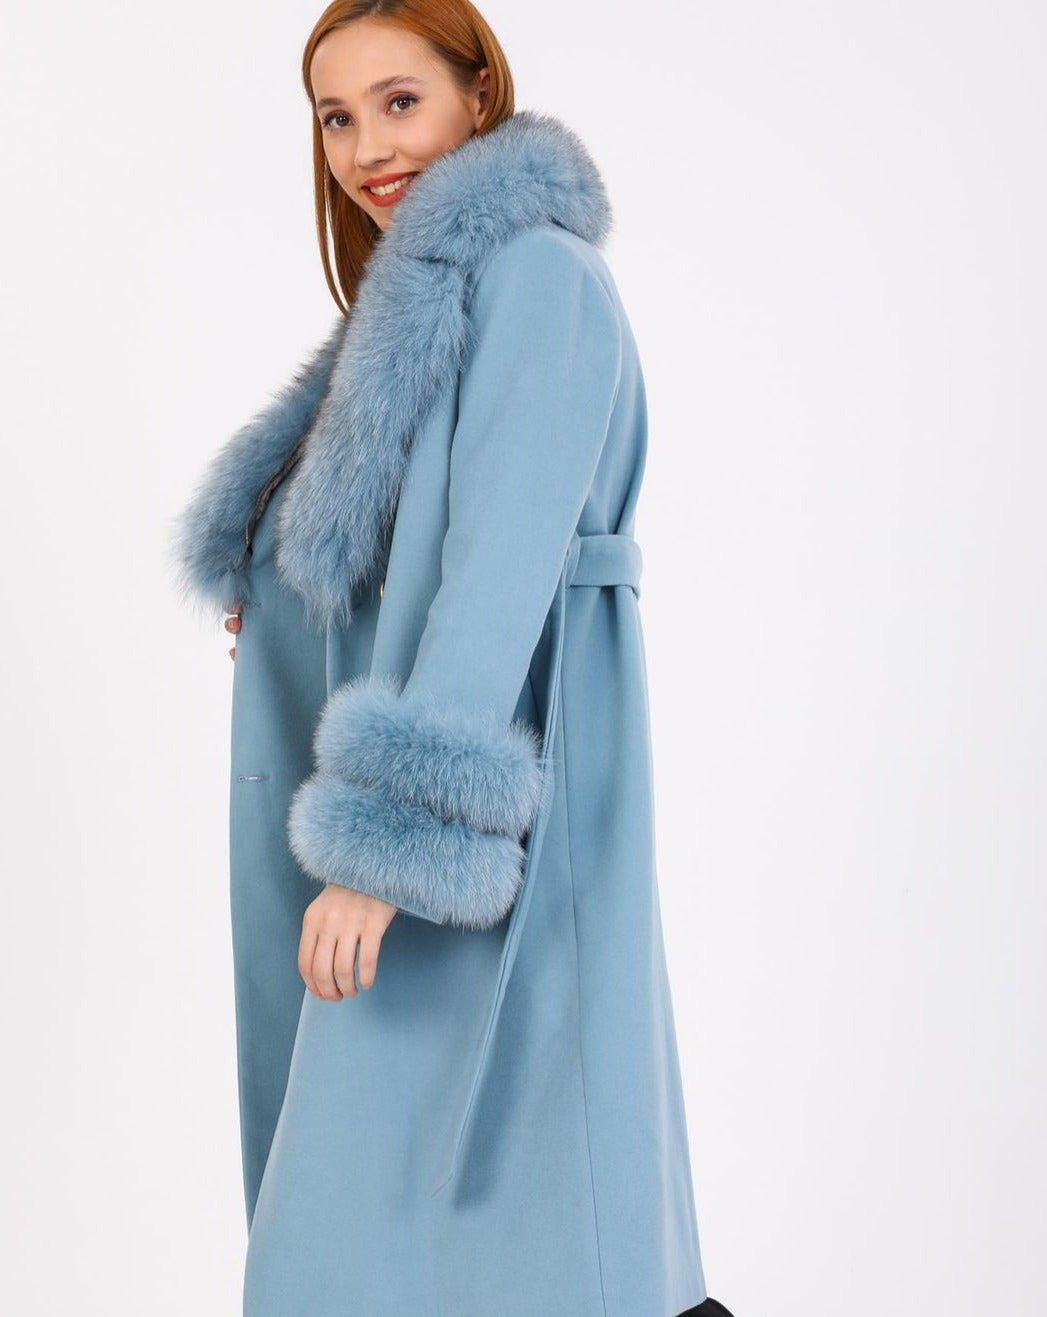 Side of Sophisticated GLORIA LIGHT BLUE Coat with Customizable Fox Fur Details